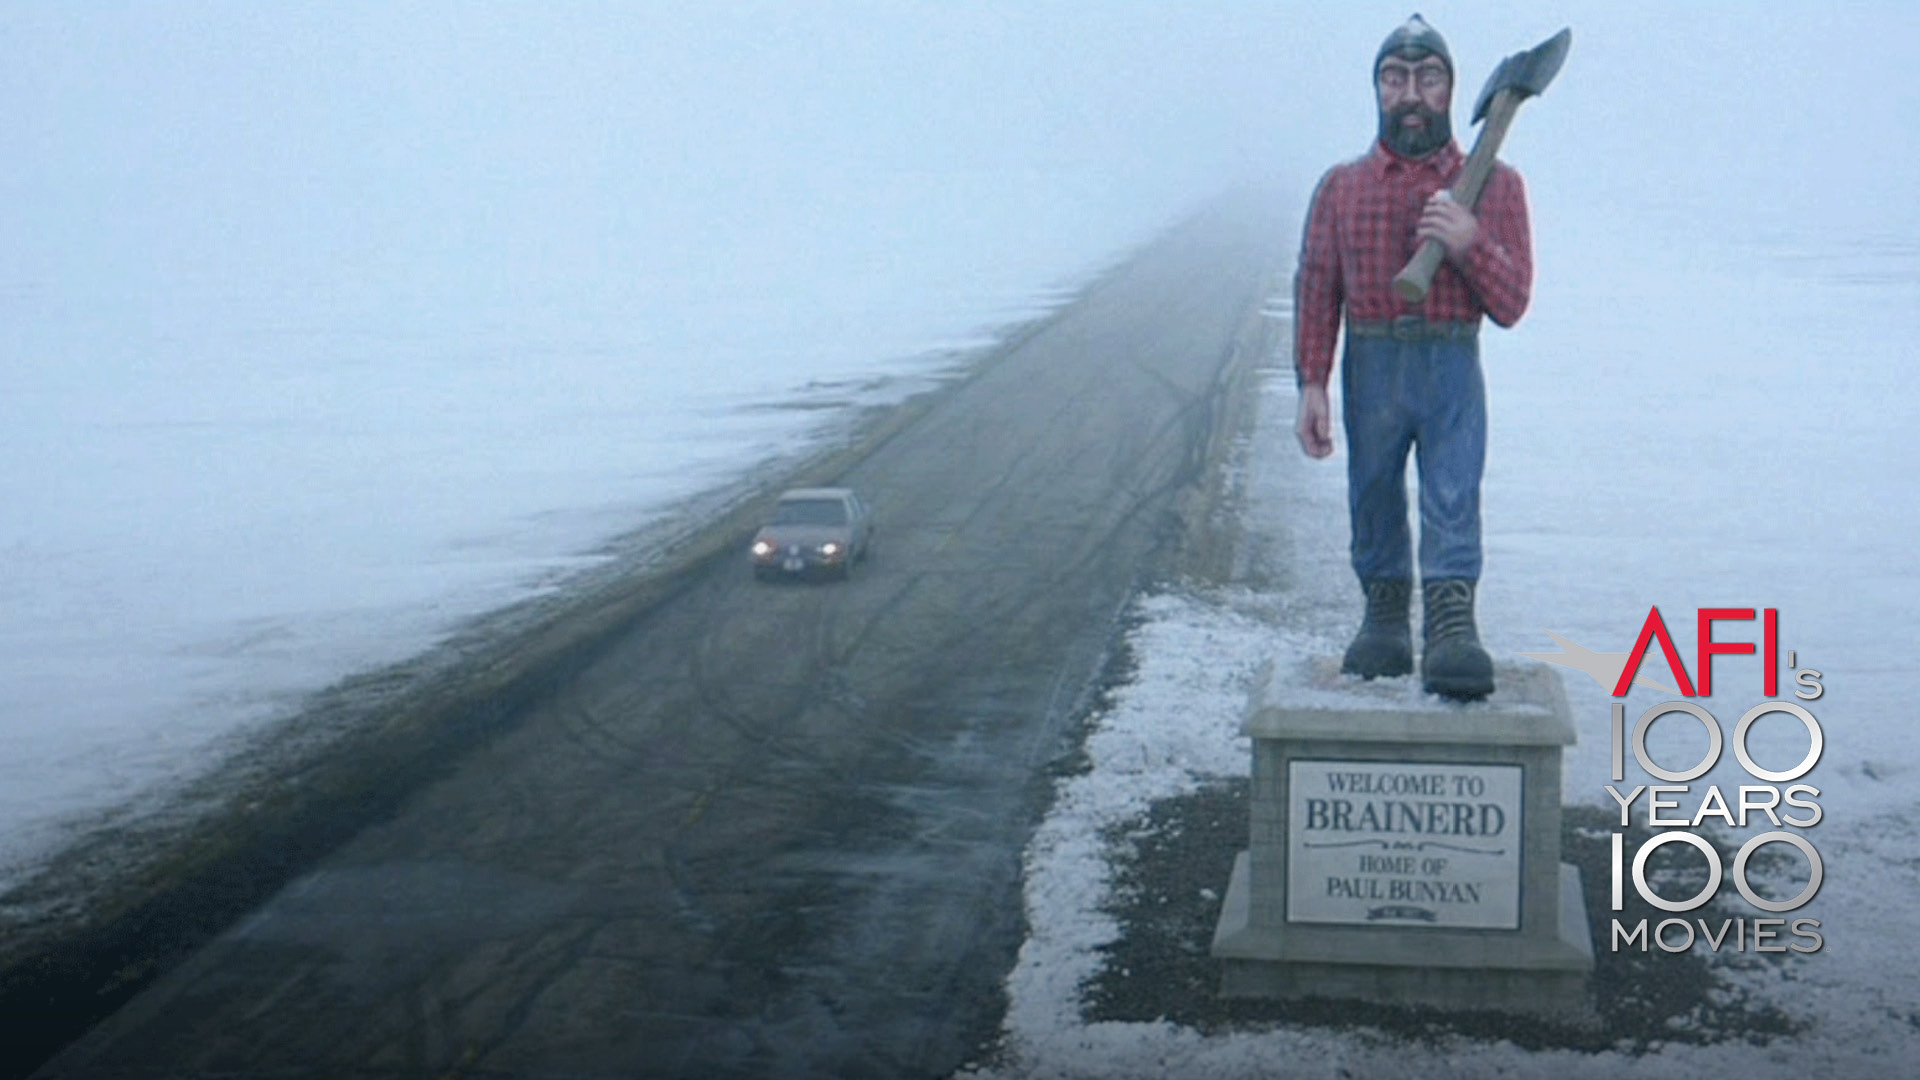 On the right corner is the AFI 100 YEARS...100 MOVIES logo. The film still is from FARGO: The image -- a wide shot taken from high above the ground) shows a Paul Bunyan statue on the side of a road. Snow covers the ground on either side of a road. A lone car drives toward the camera.